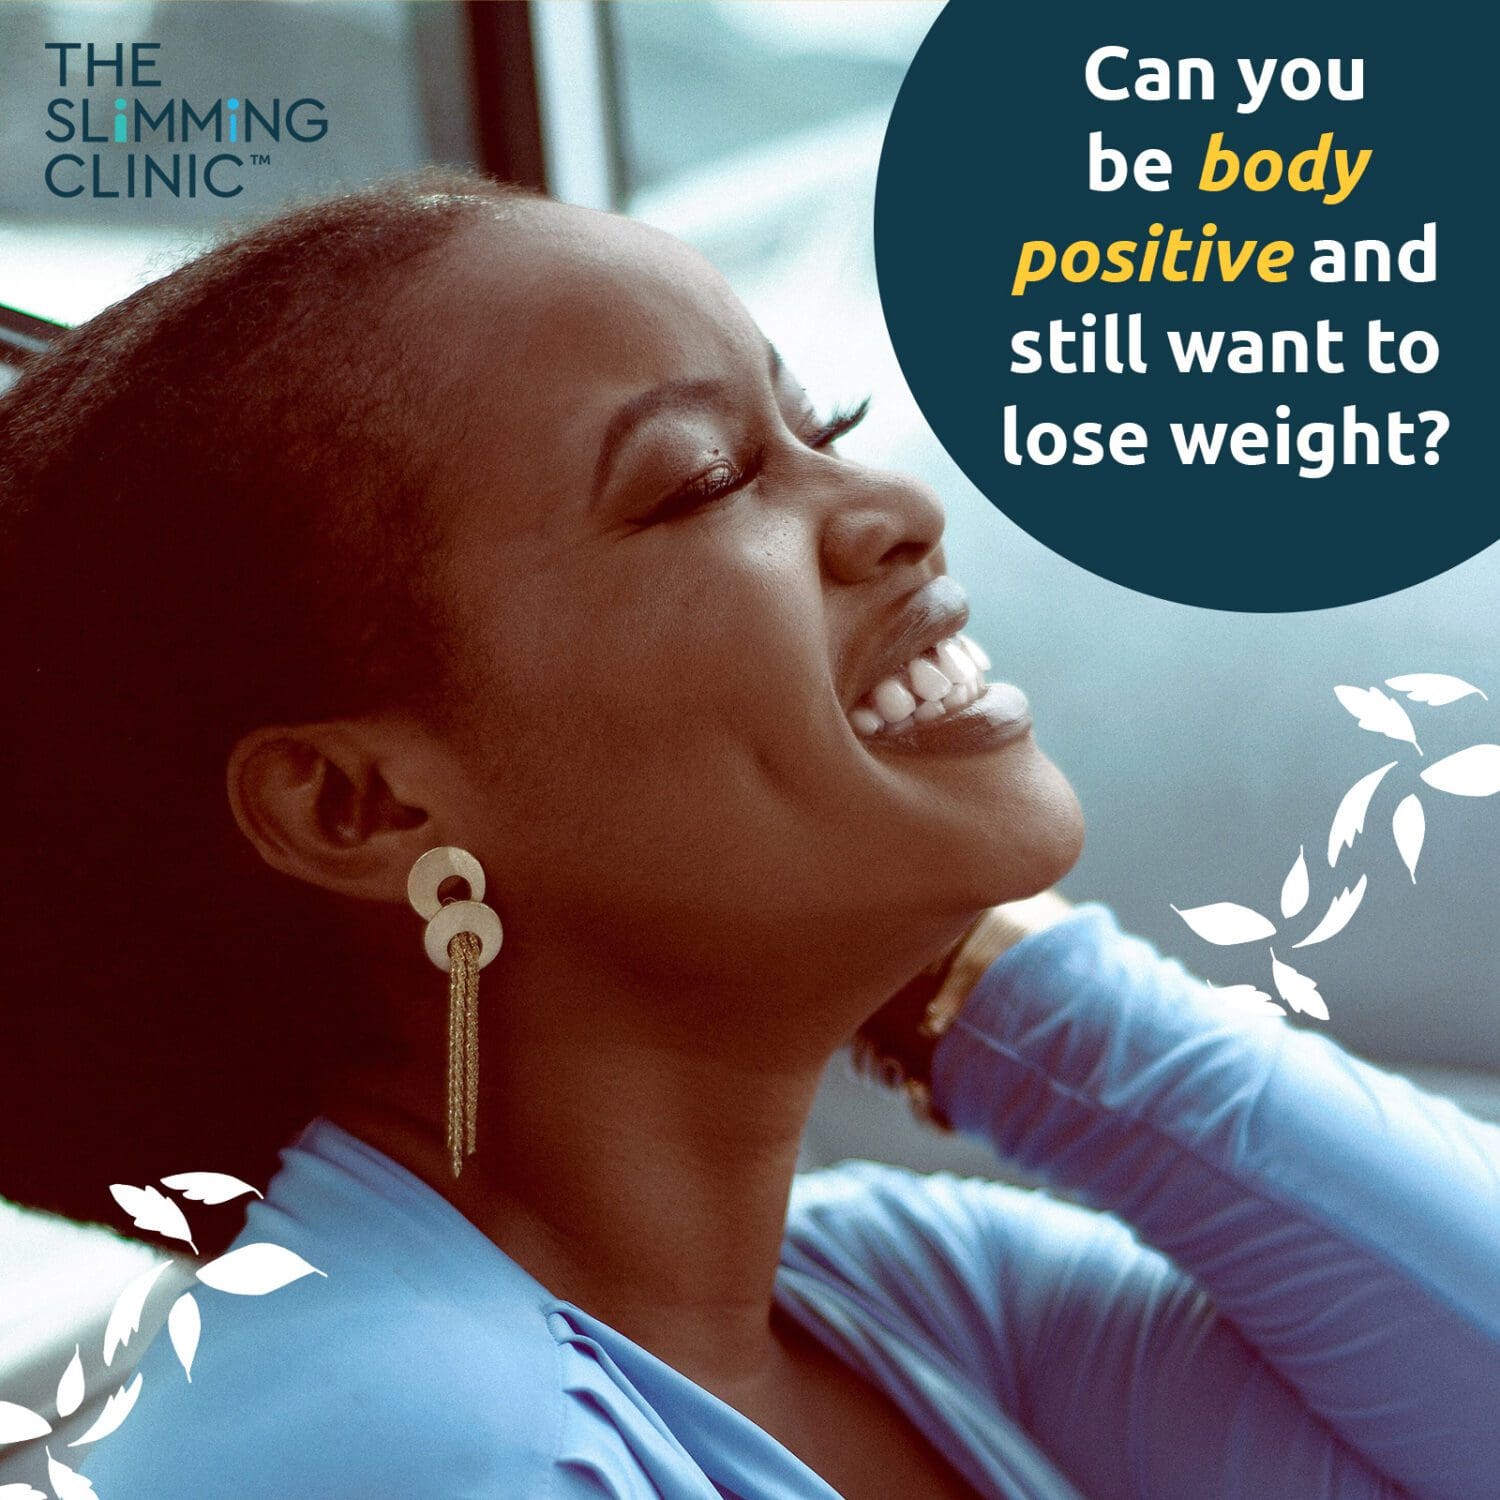 Can You Be Body Positive and Want To Lose Weight?